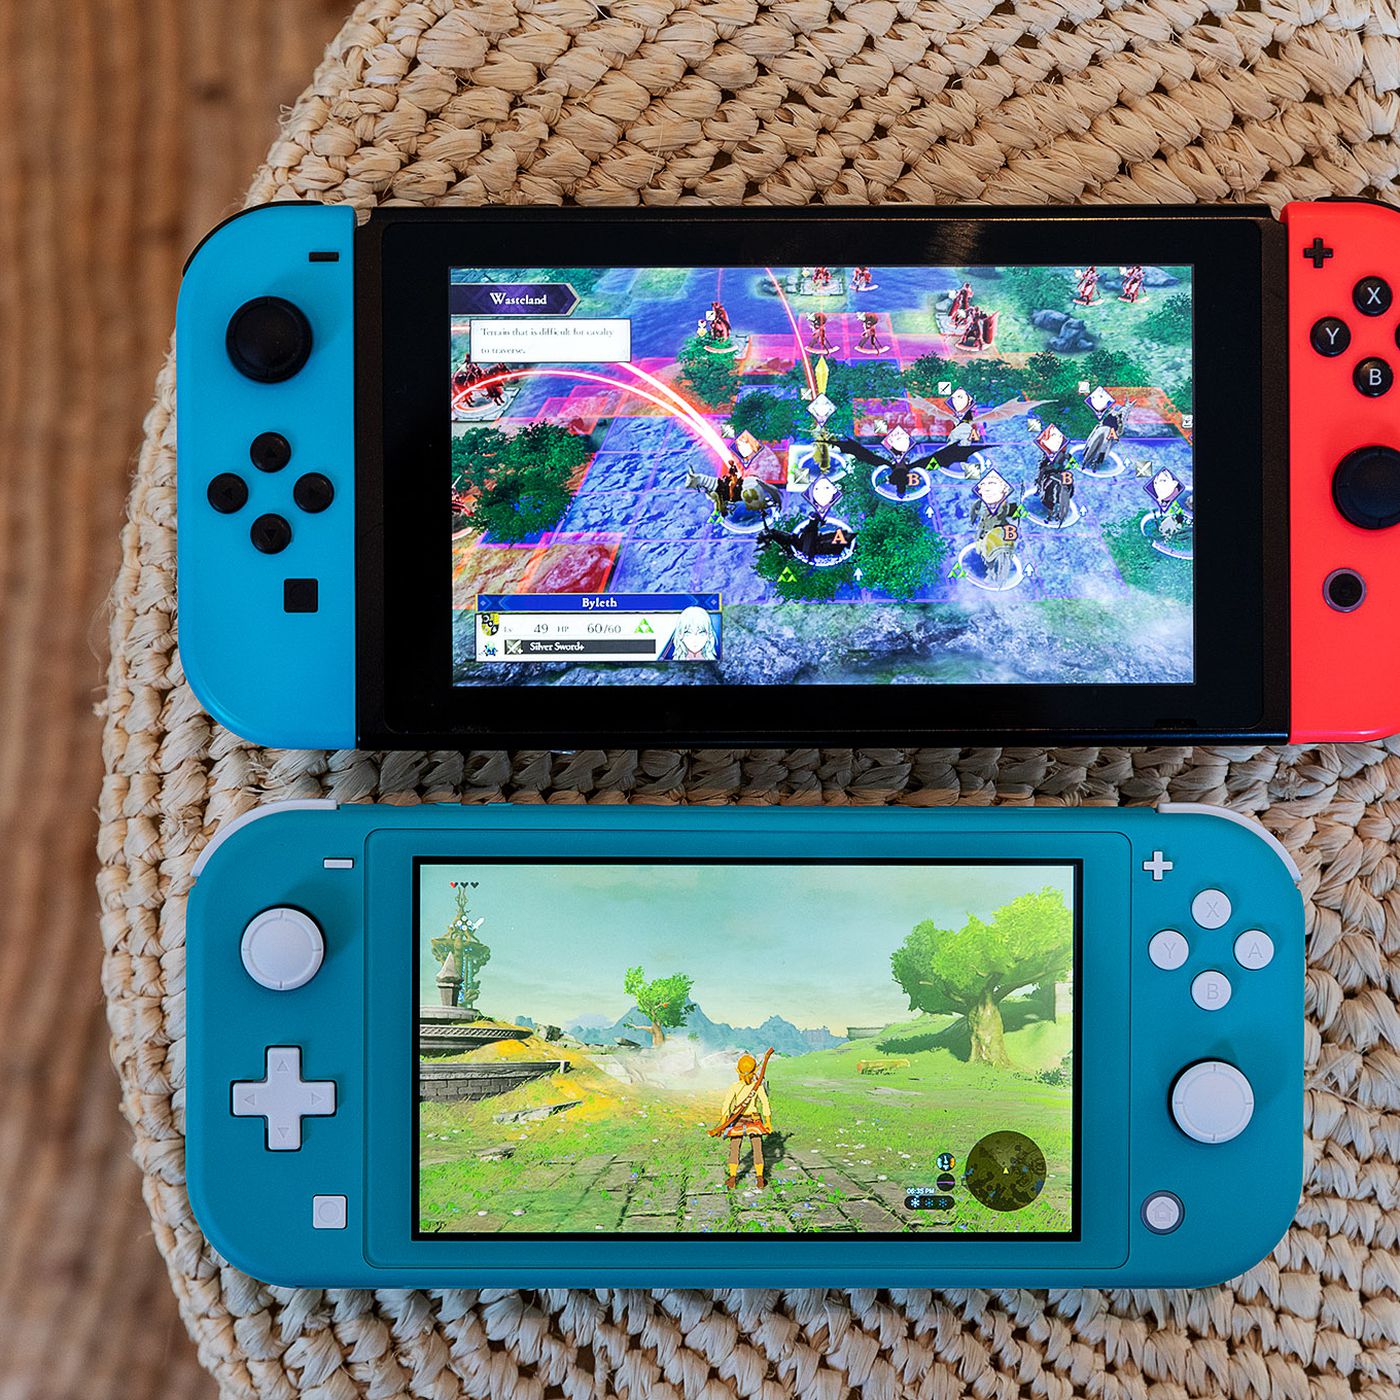 What games are on a Switch?